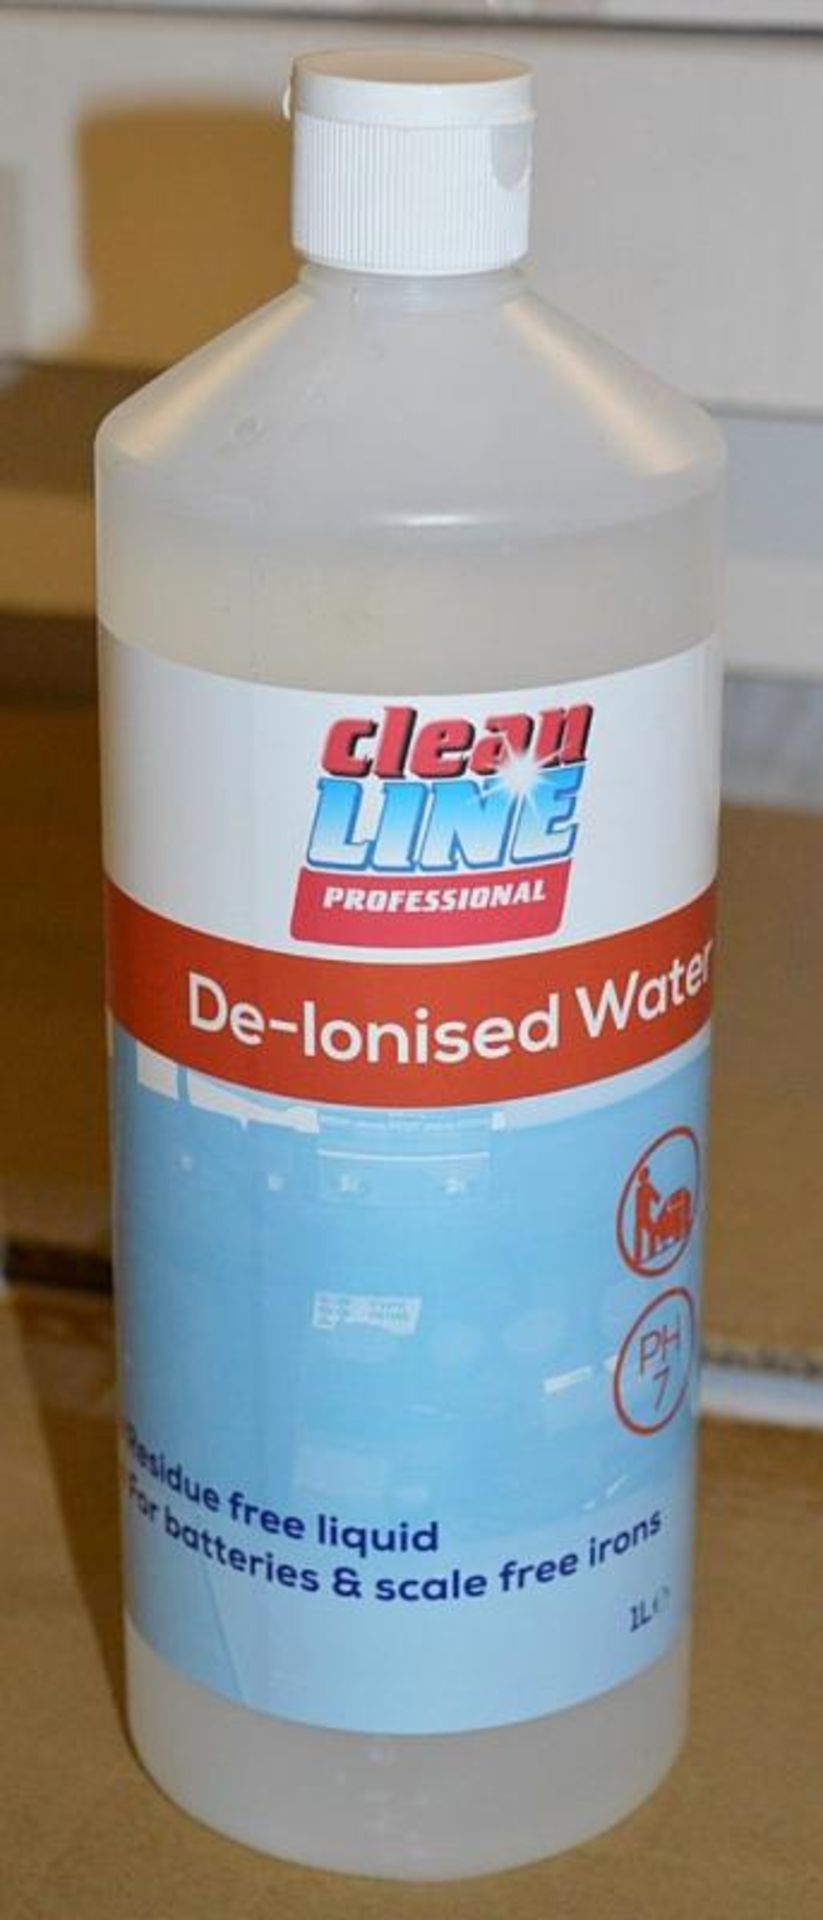 30 x 1-Litre Clean Line Professional Branded De-Ionised (Distilled) Water - New / Unused Stock -